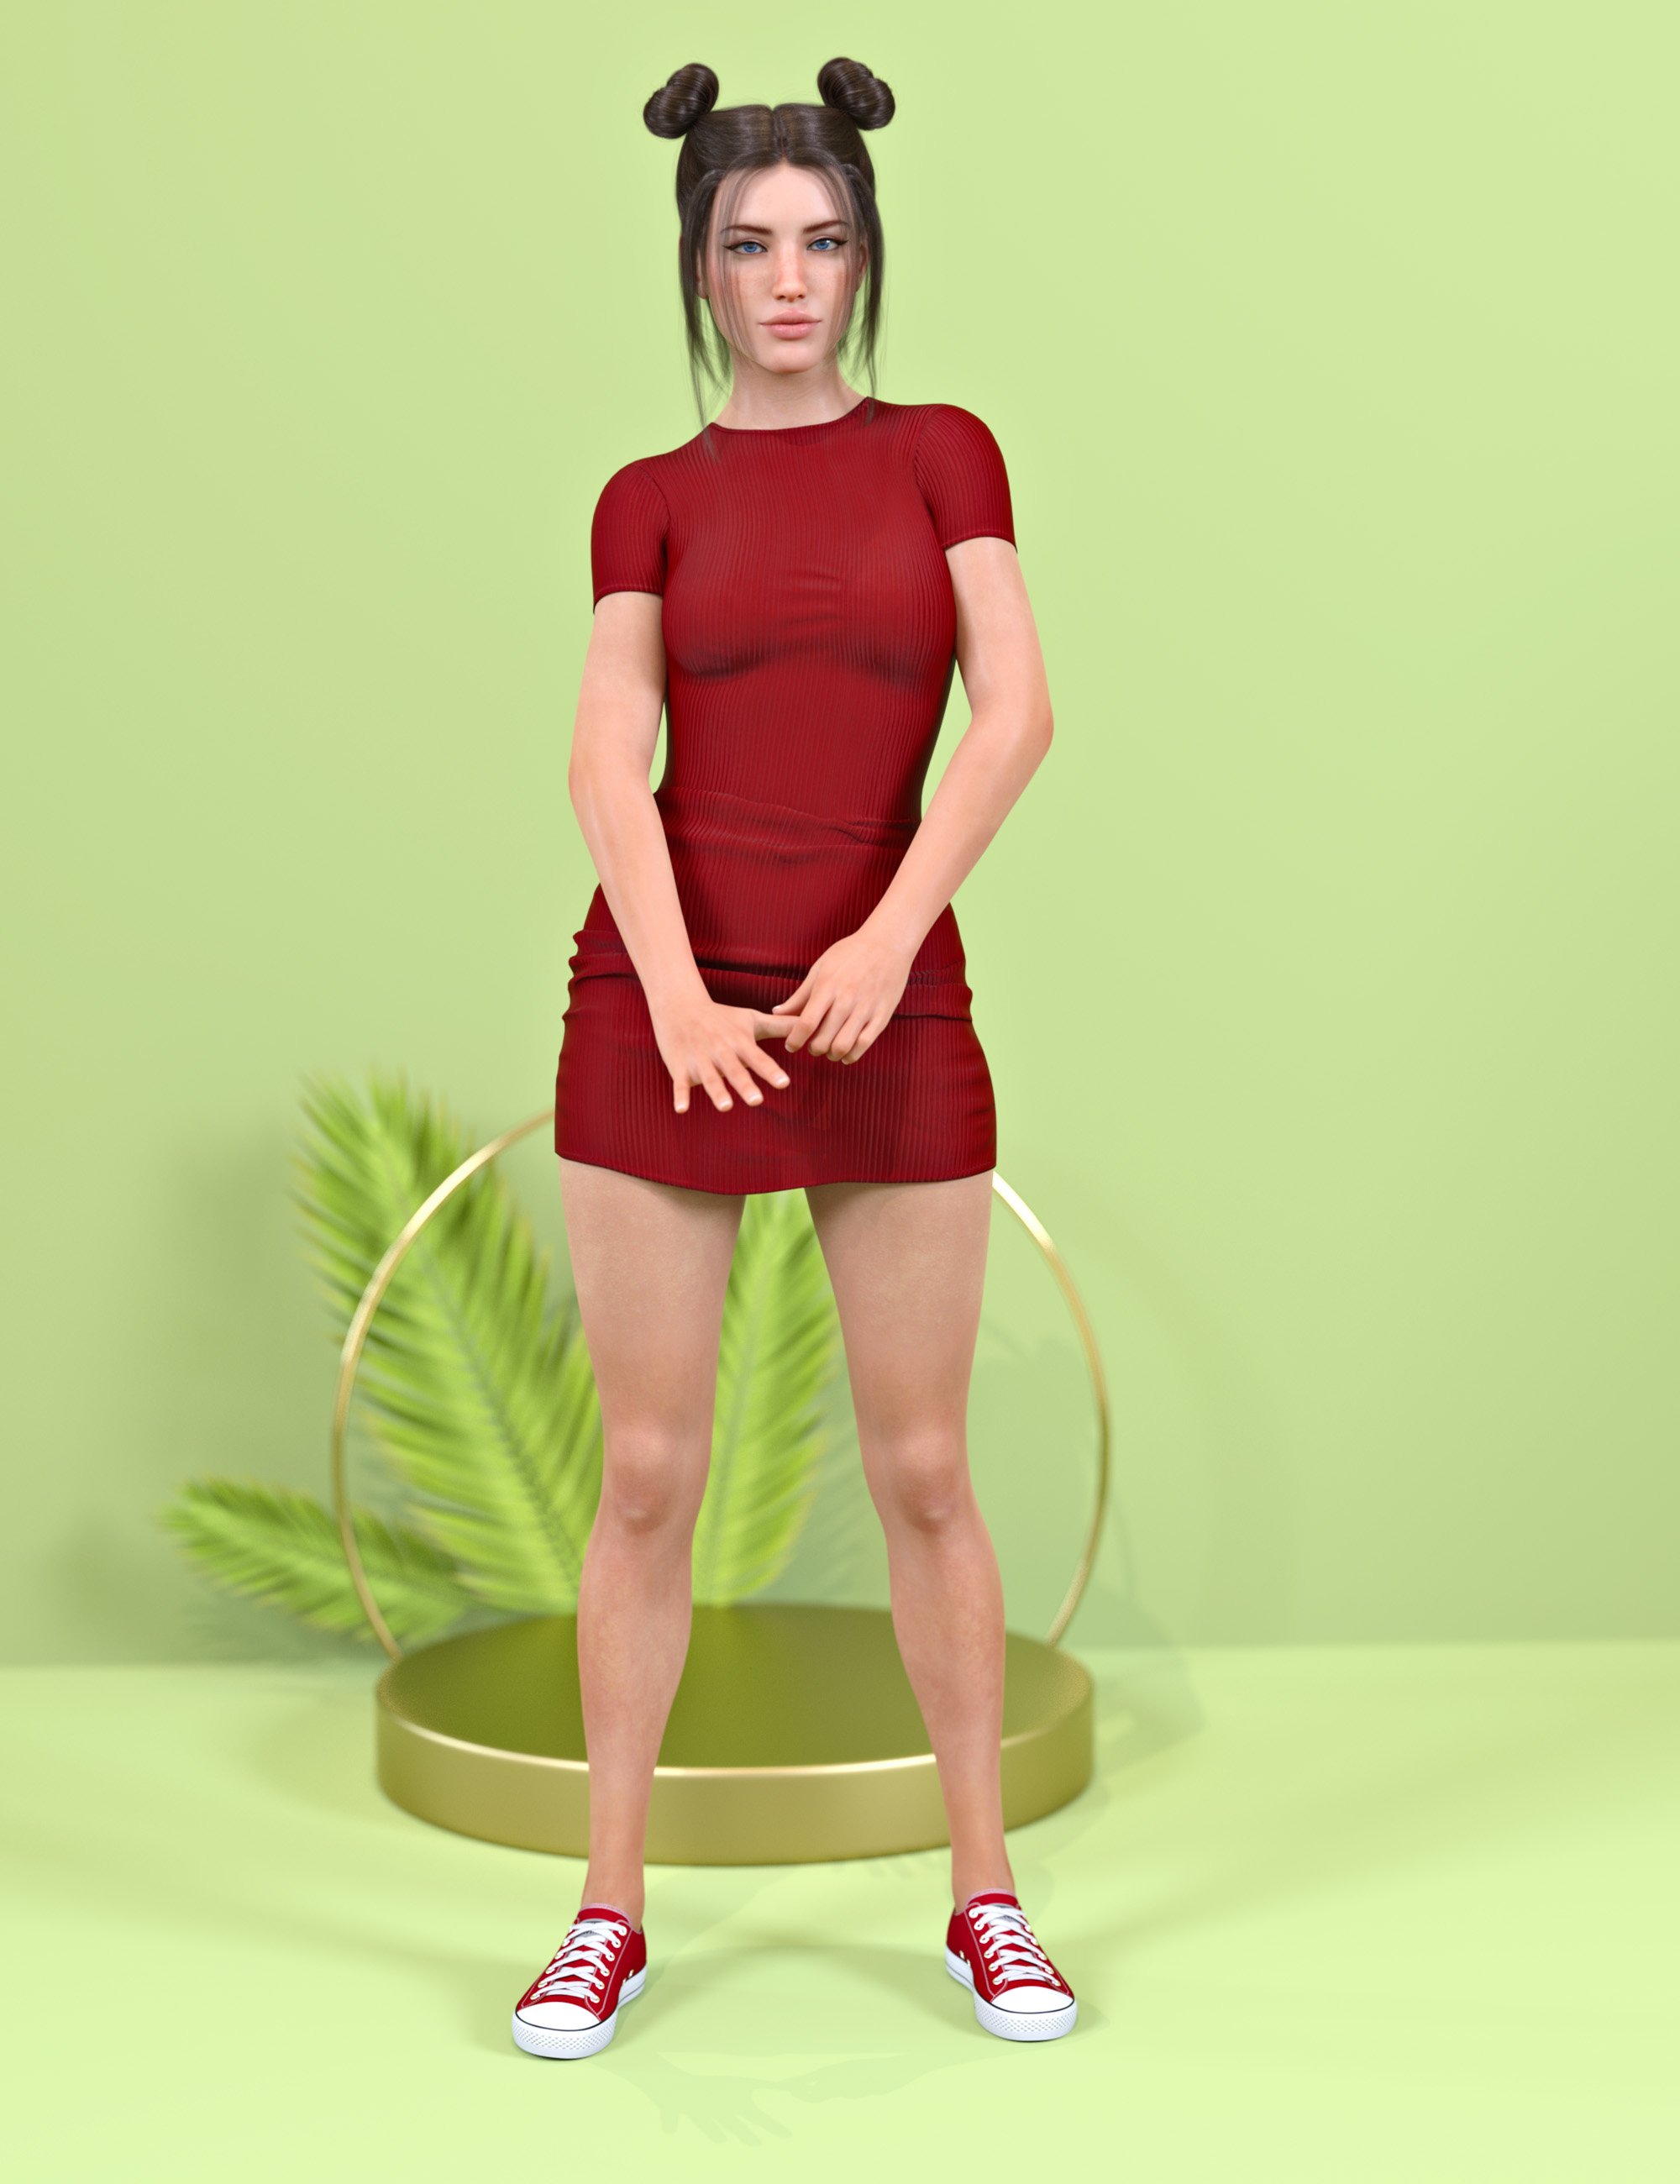 Z Everyday Standing Pose Mega Set for Genesis 8 and 8.1 Female by: Zeddicuss, 3D Models by Daz 3D